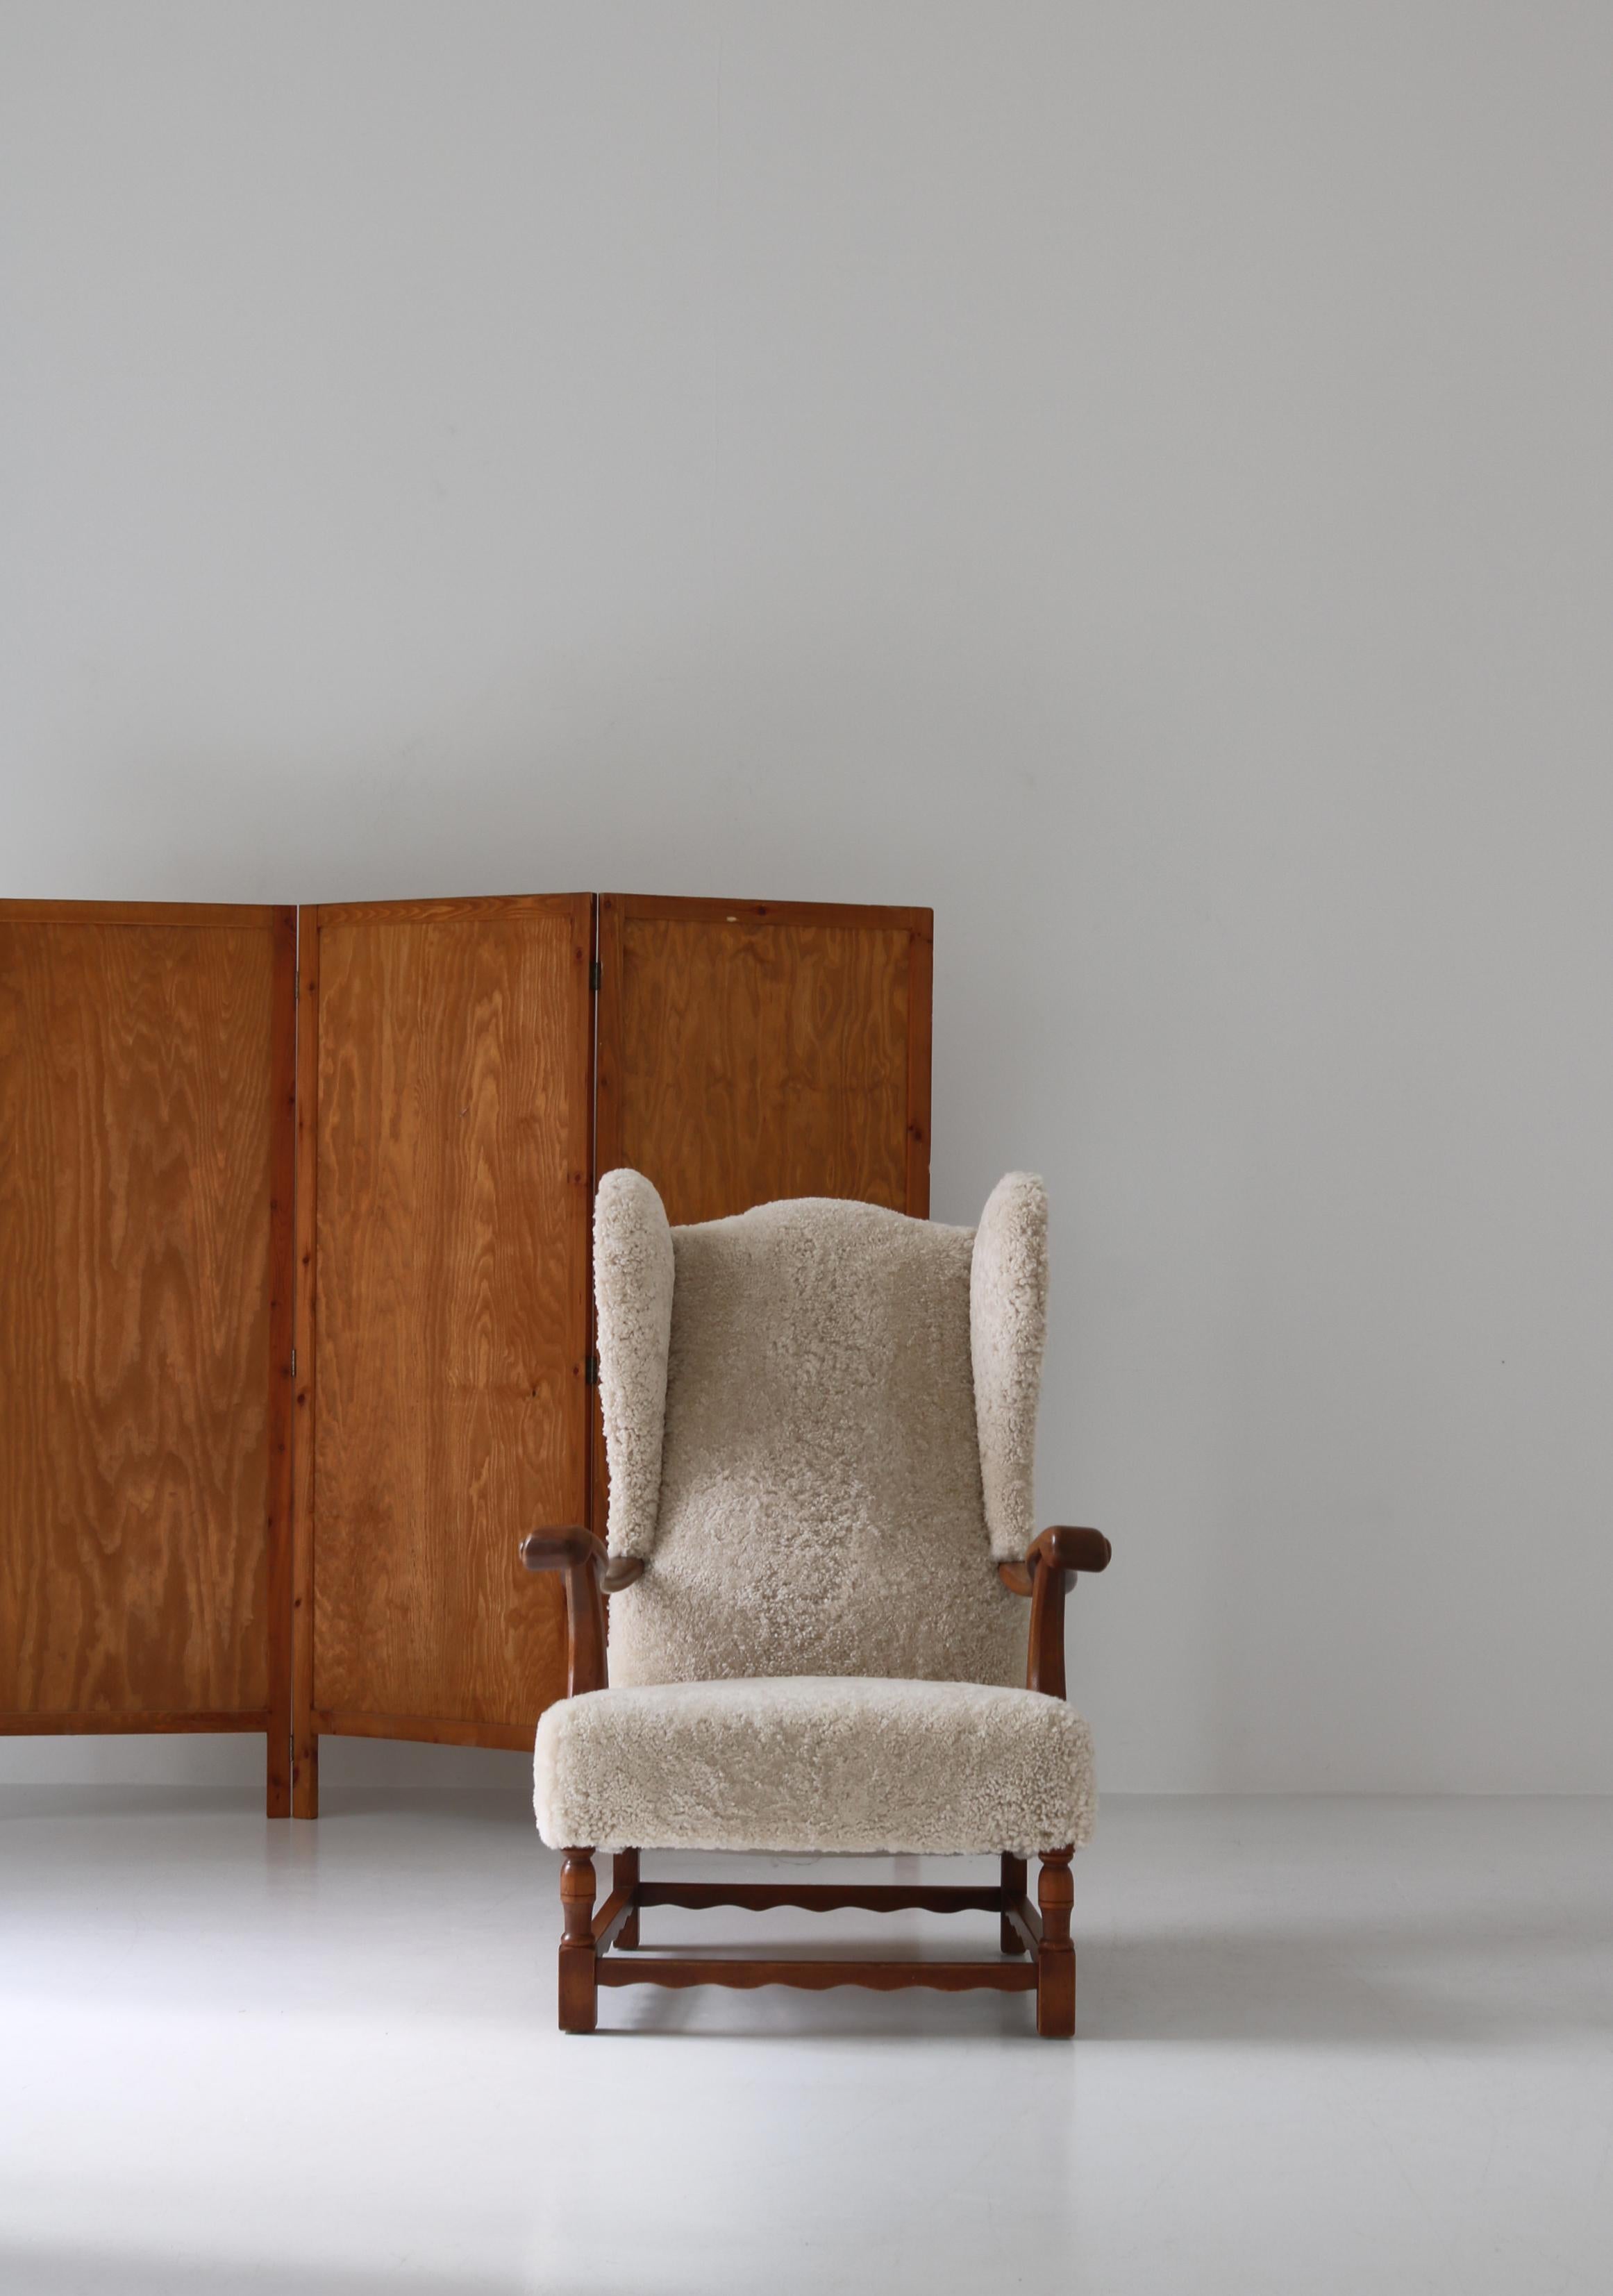 Mid-20th Century Wingback Lounge Chairs in Solid Oak and Sheepskin by Danish Cabinetmaker, 1940s